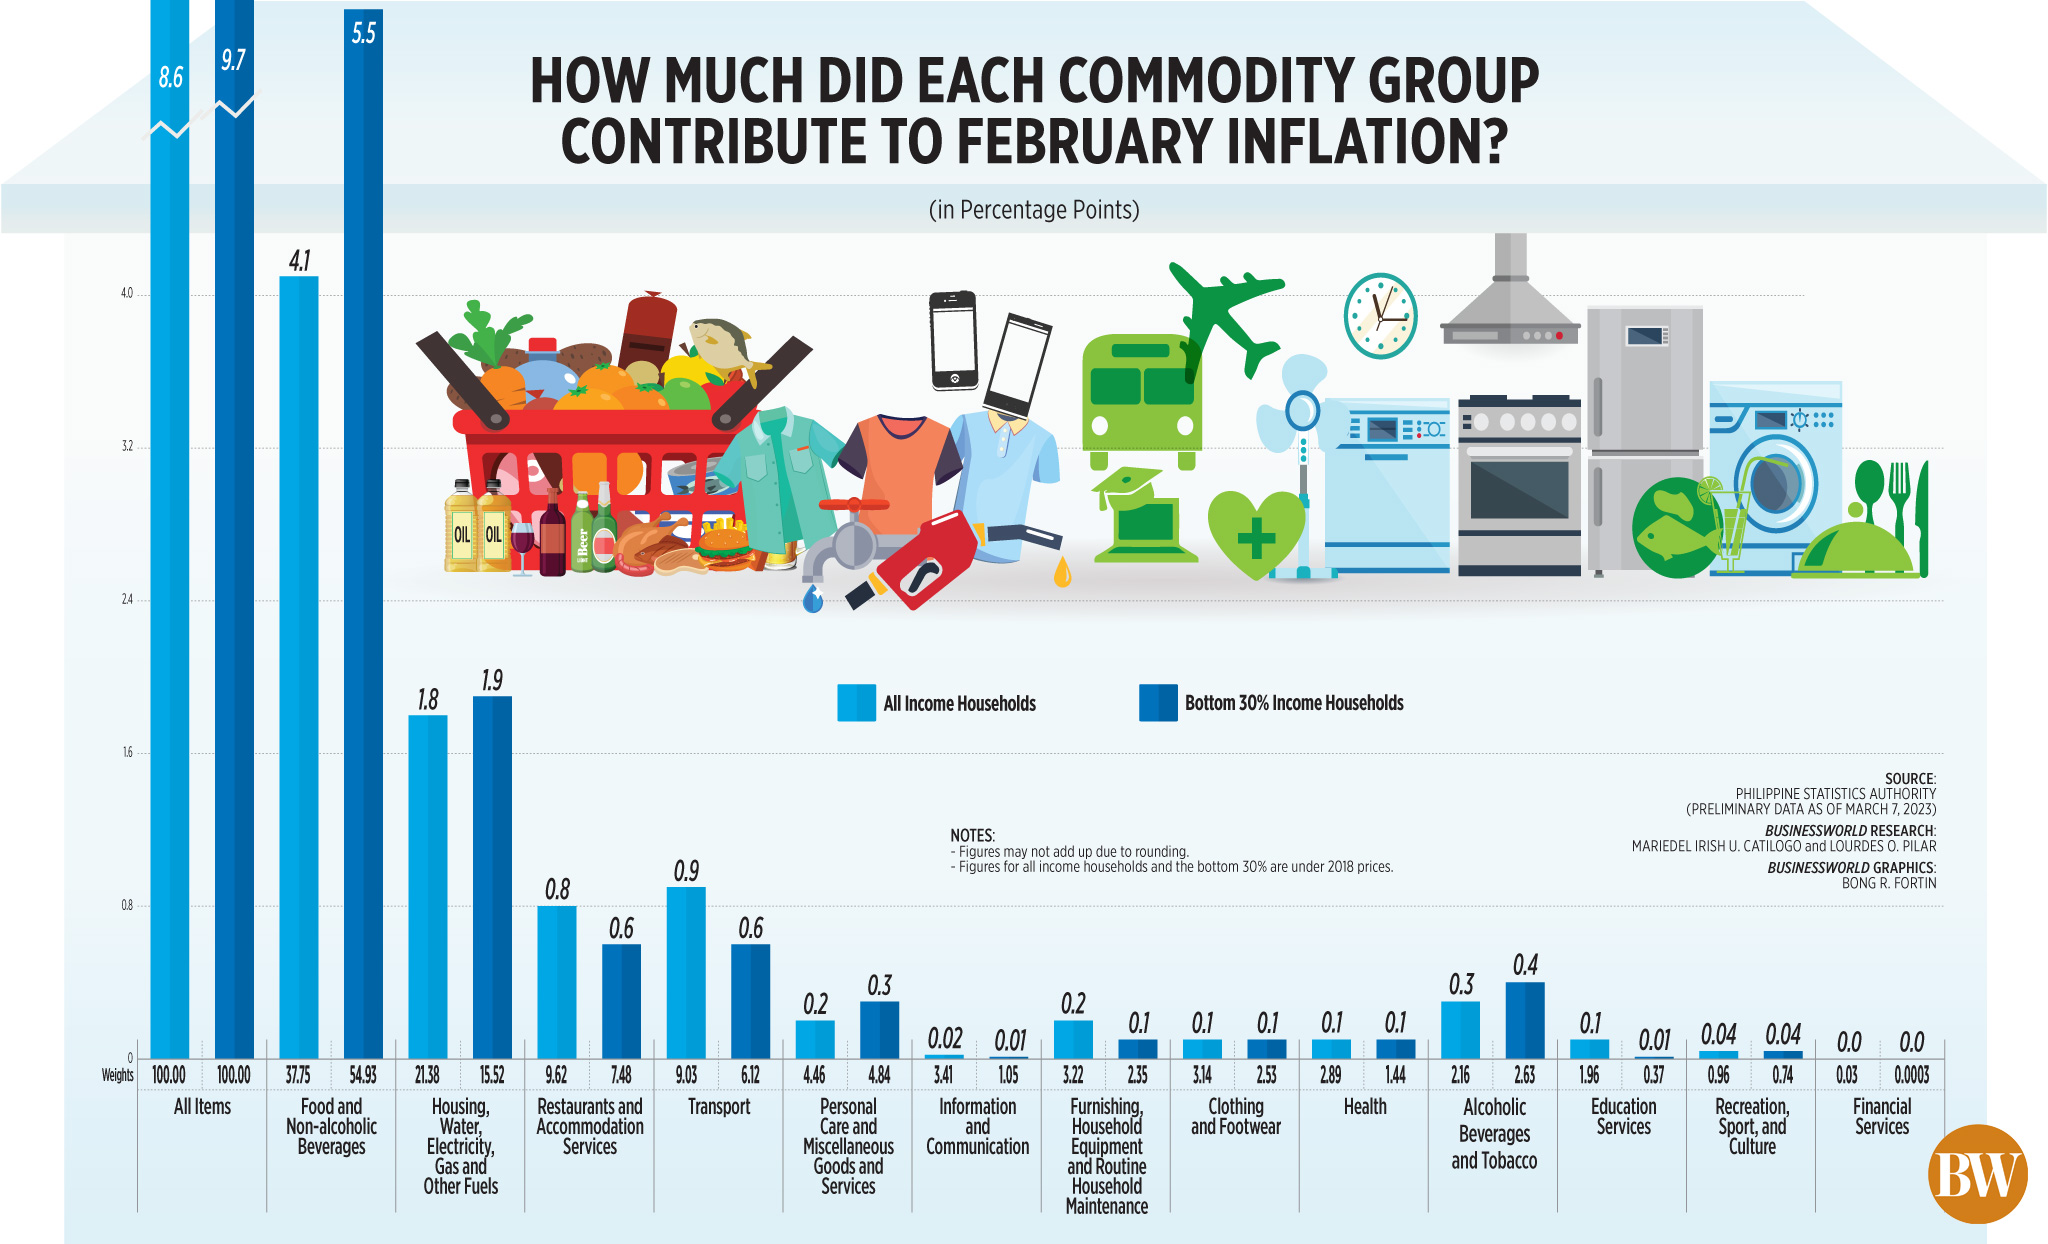 How much did each commodity group contribute to February inflation?